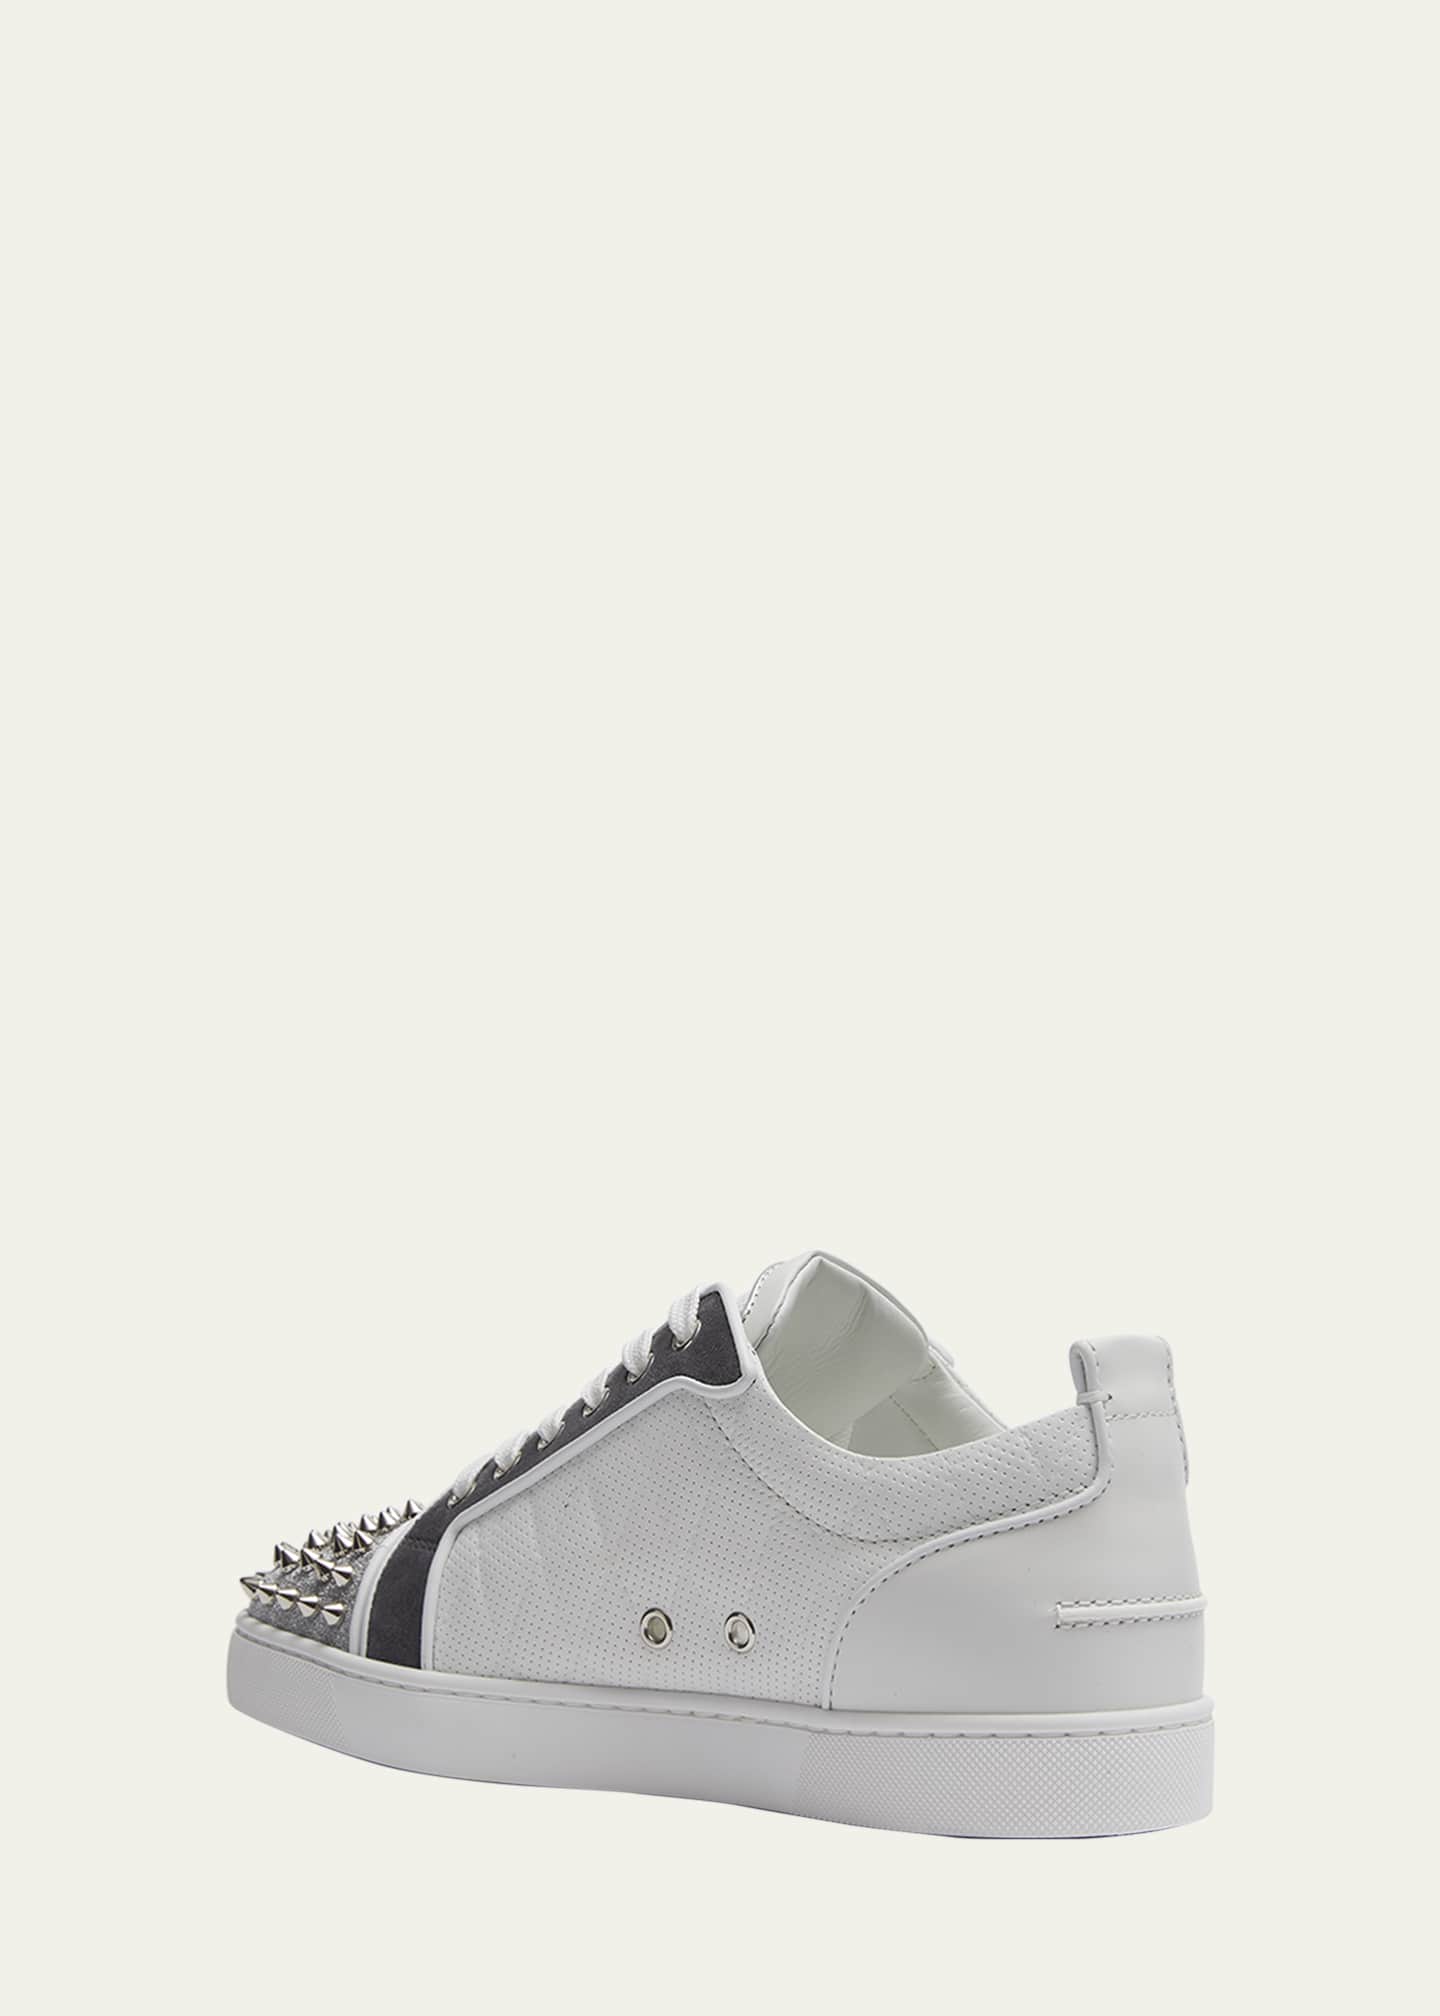 Christian Louboutin Louis Junior Spikes Leather Sneakers